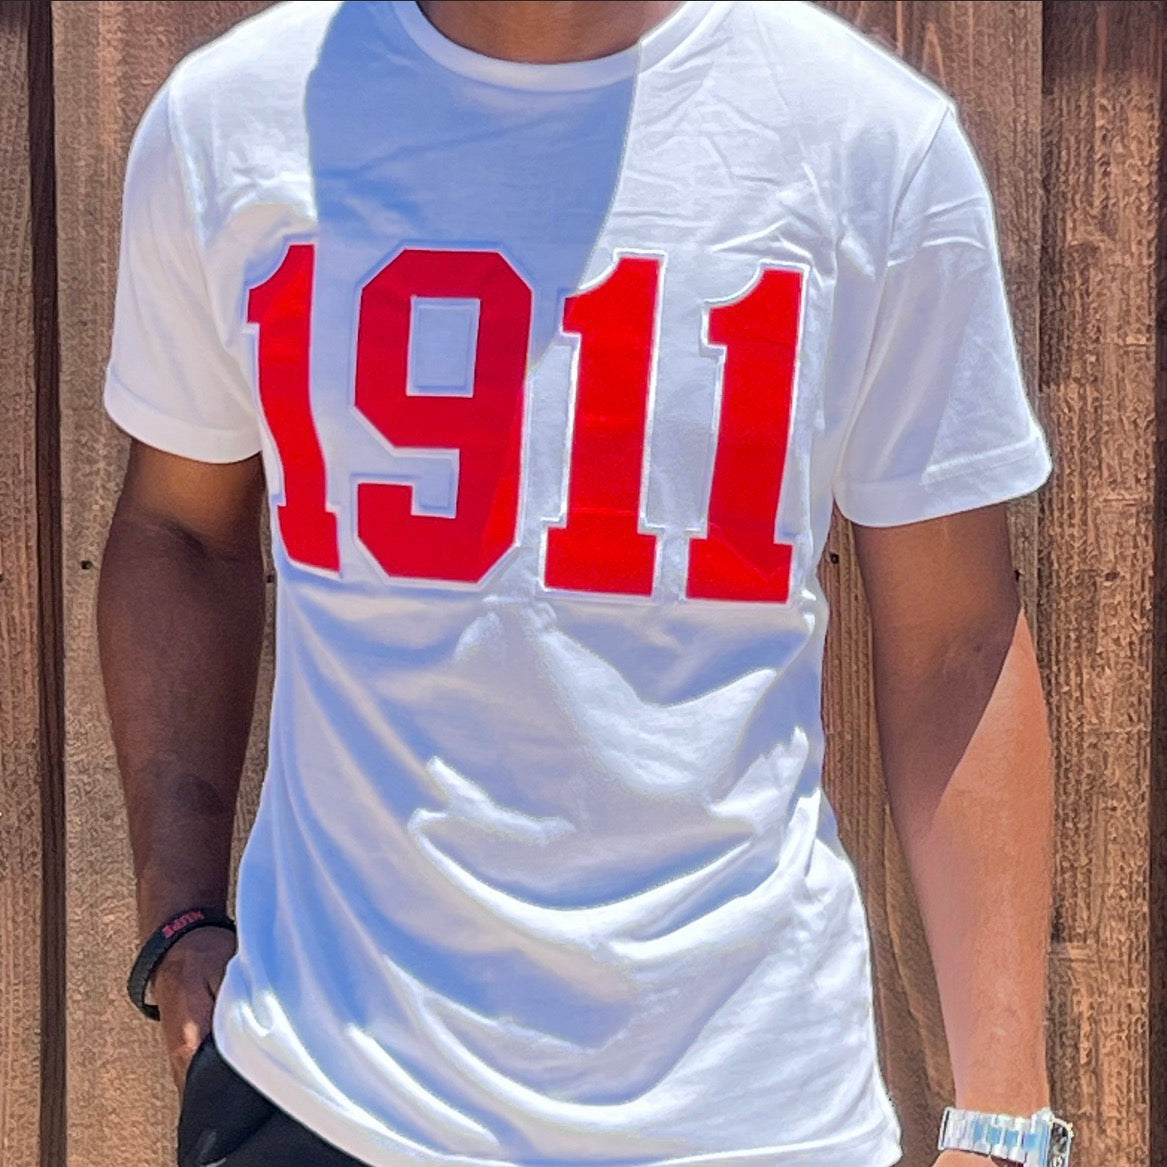 Kappa Alpha Psi 1911 Shirt – - Red T Embroidery Nupekave White